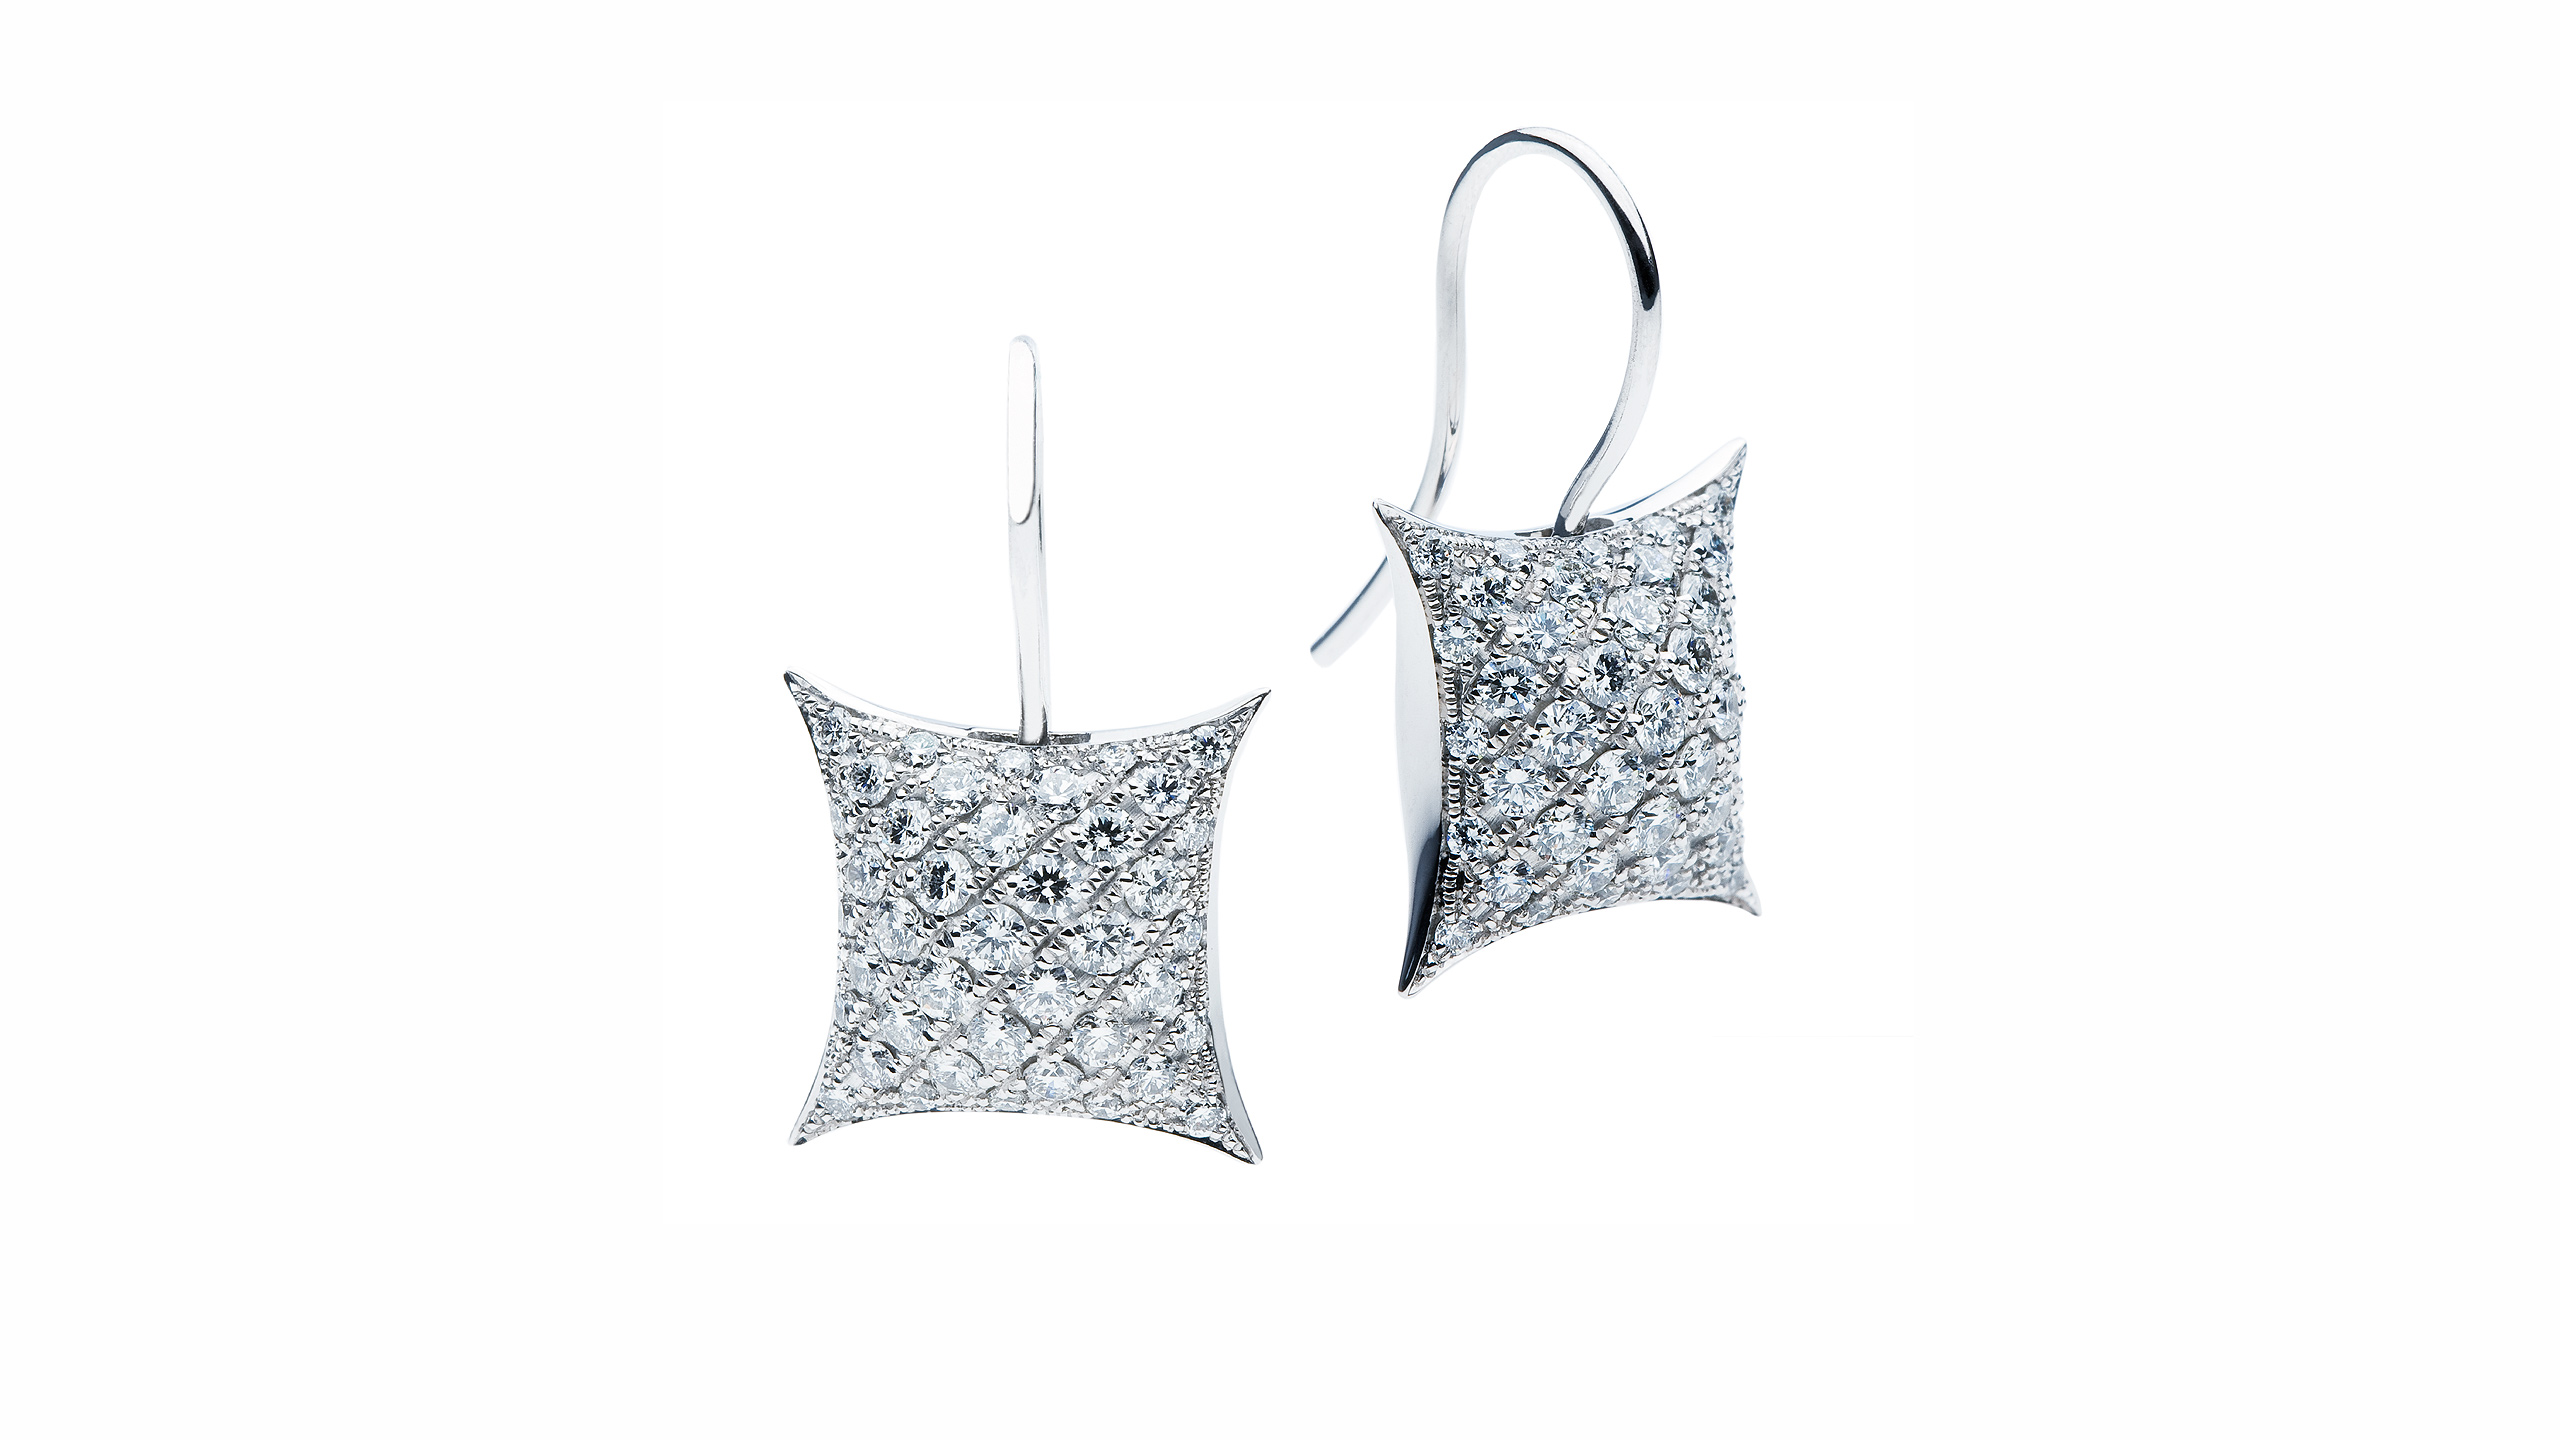 https://towejewels.com/wp-content/uploads/2012/02/Starpillow_earrings_combined_2560_Web.jpg